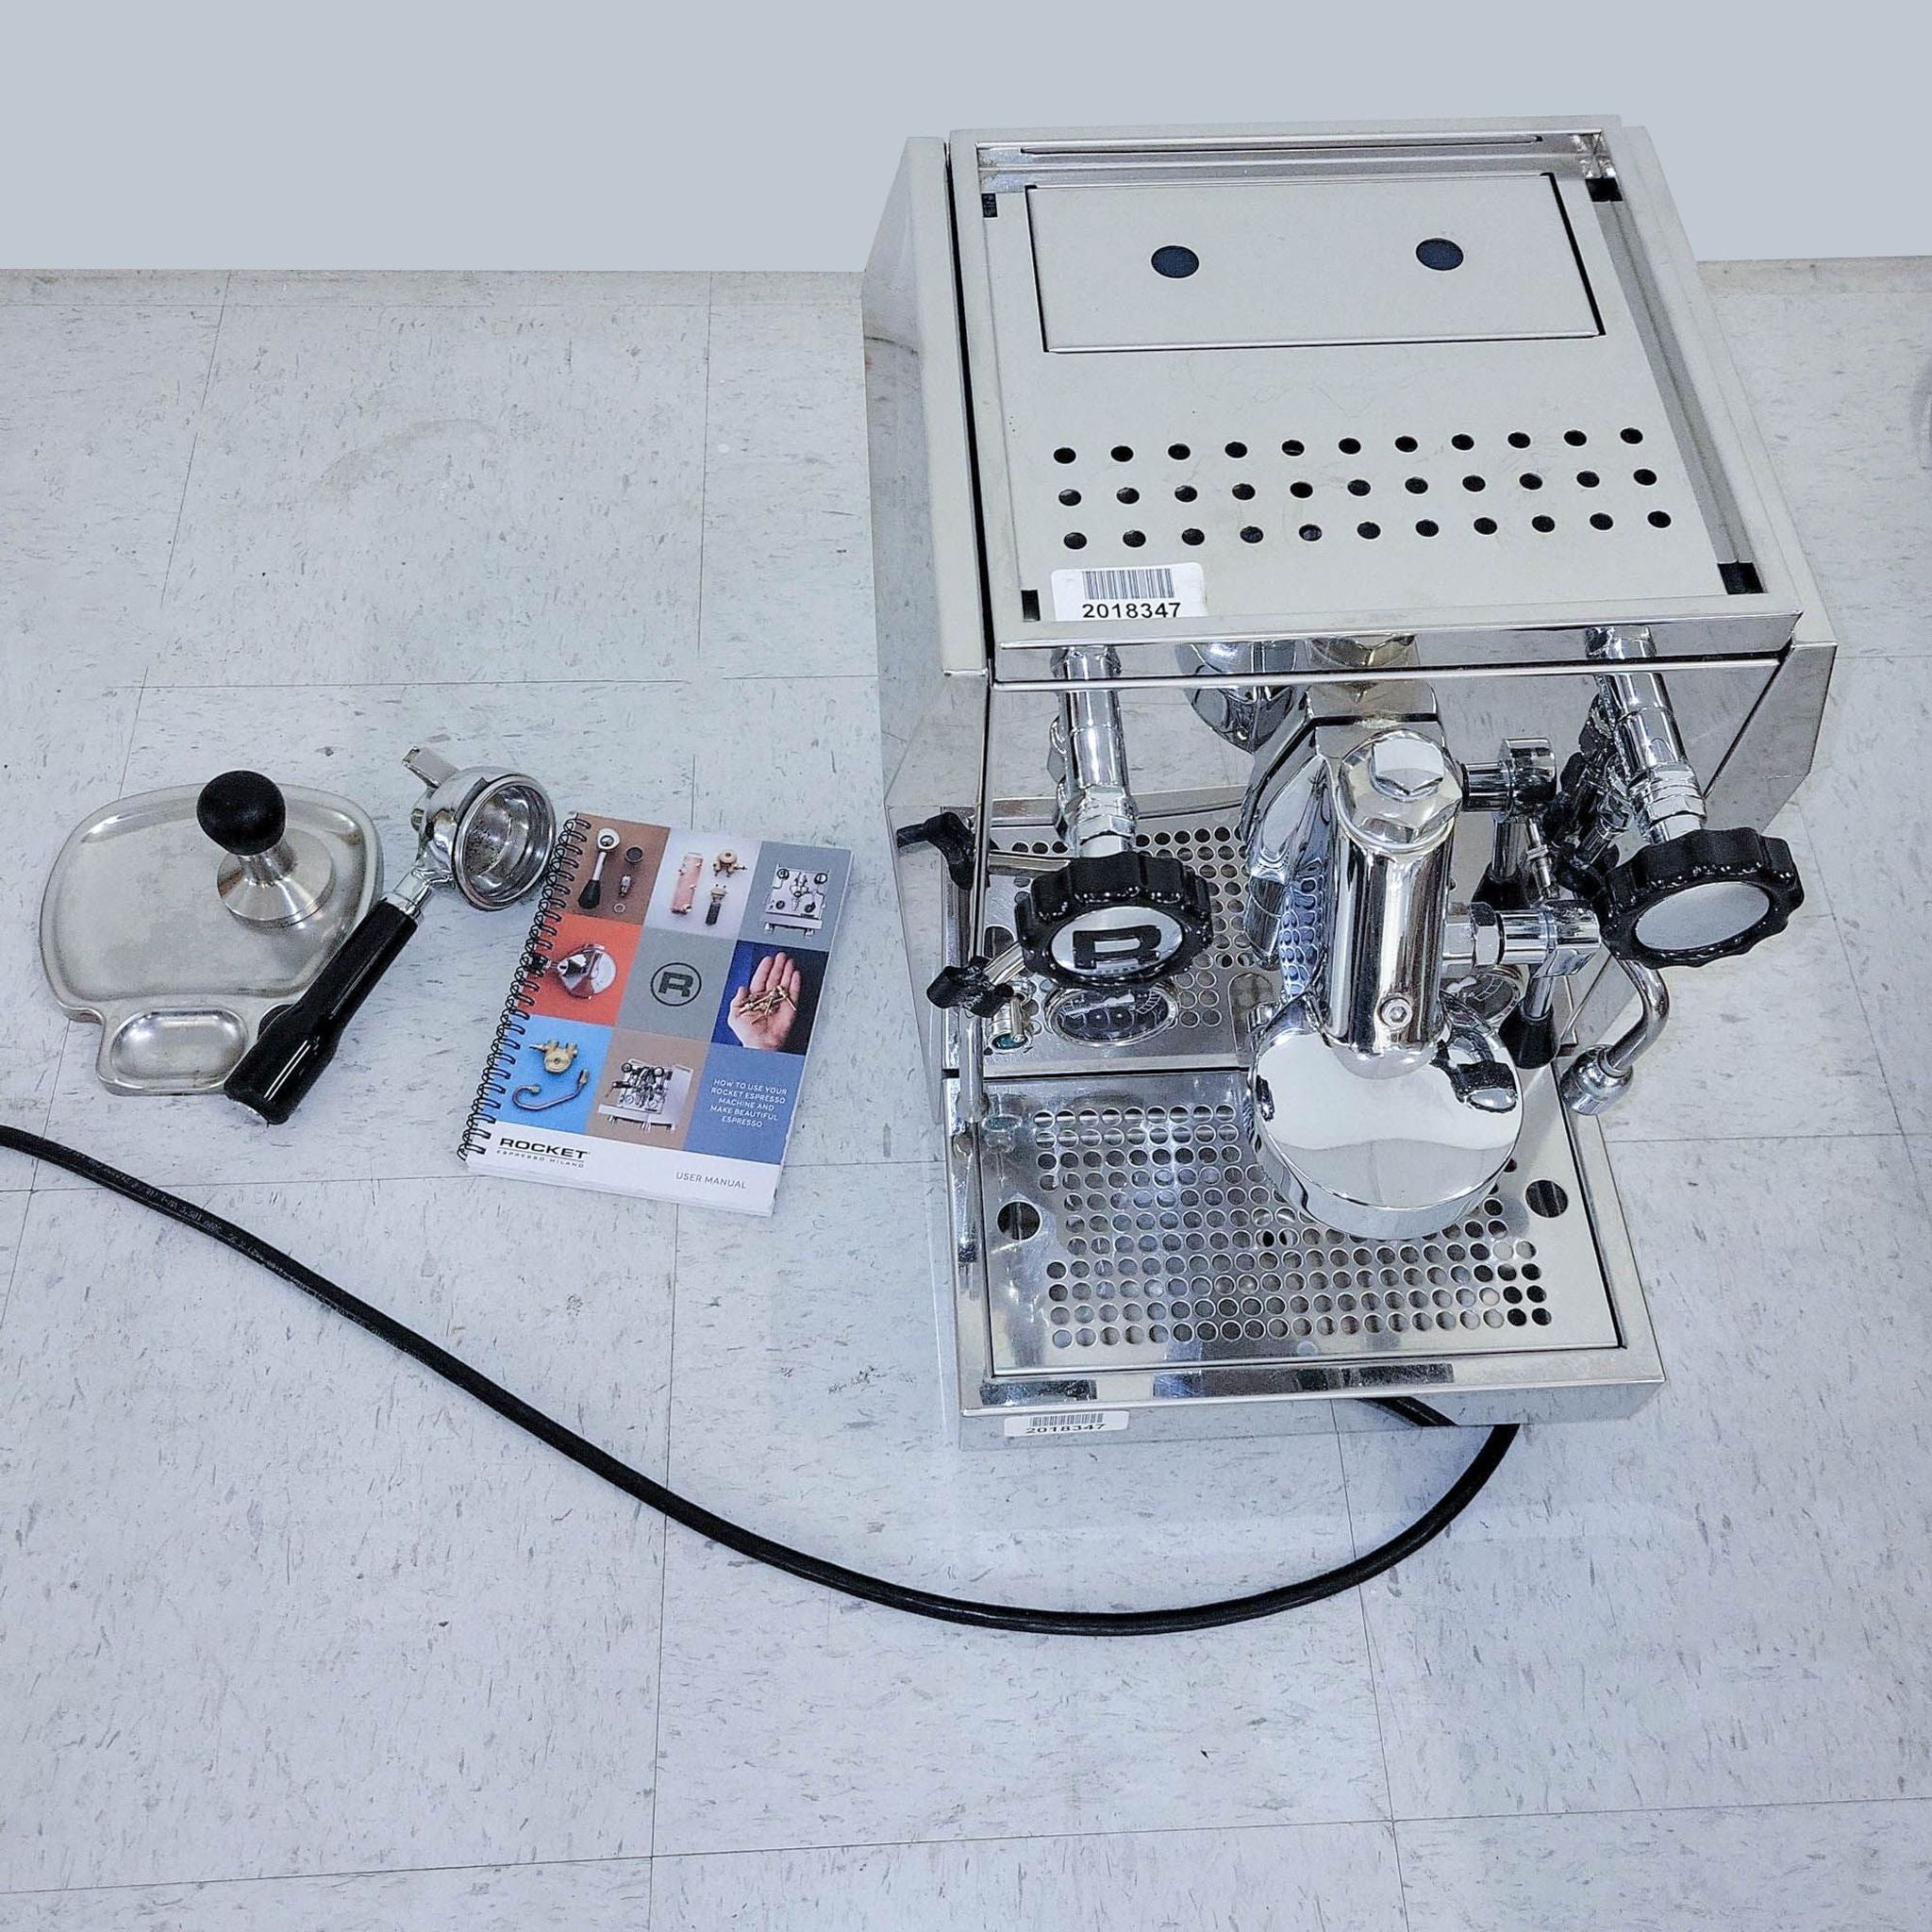 Top view of a Rocket Espresso Machine alongside its accessories including a tamper, manual, and coffee filter on a white floor.